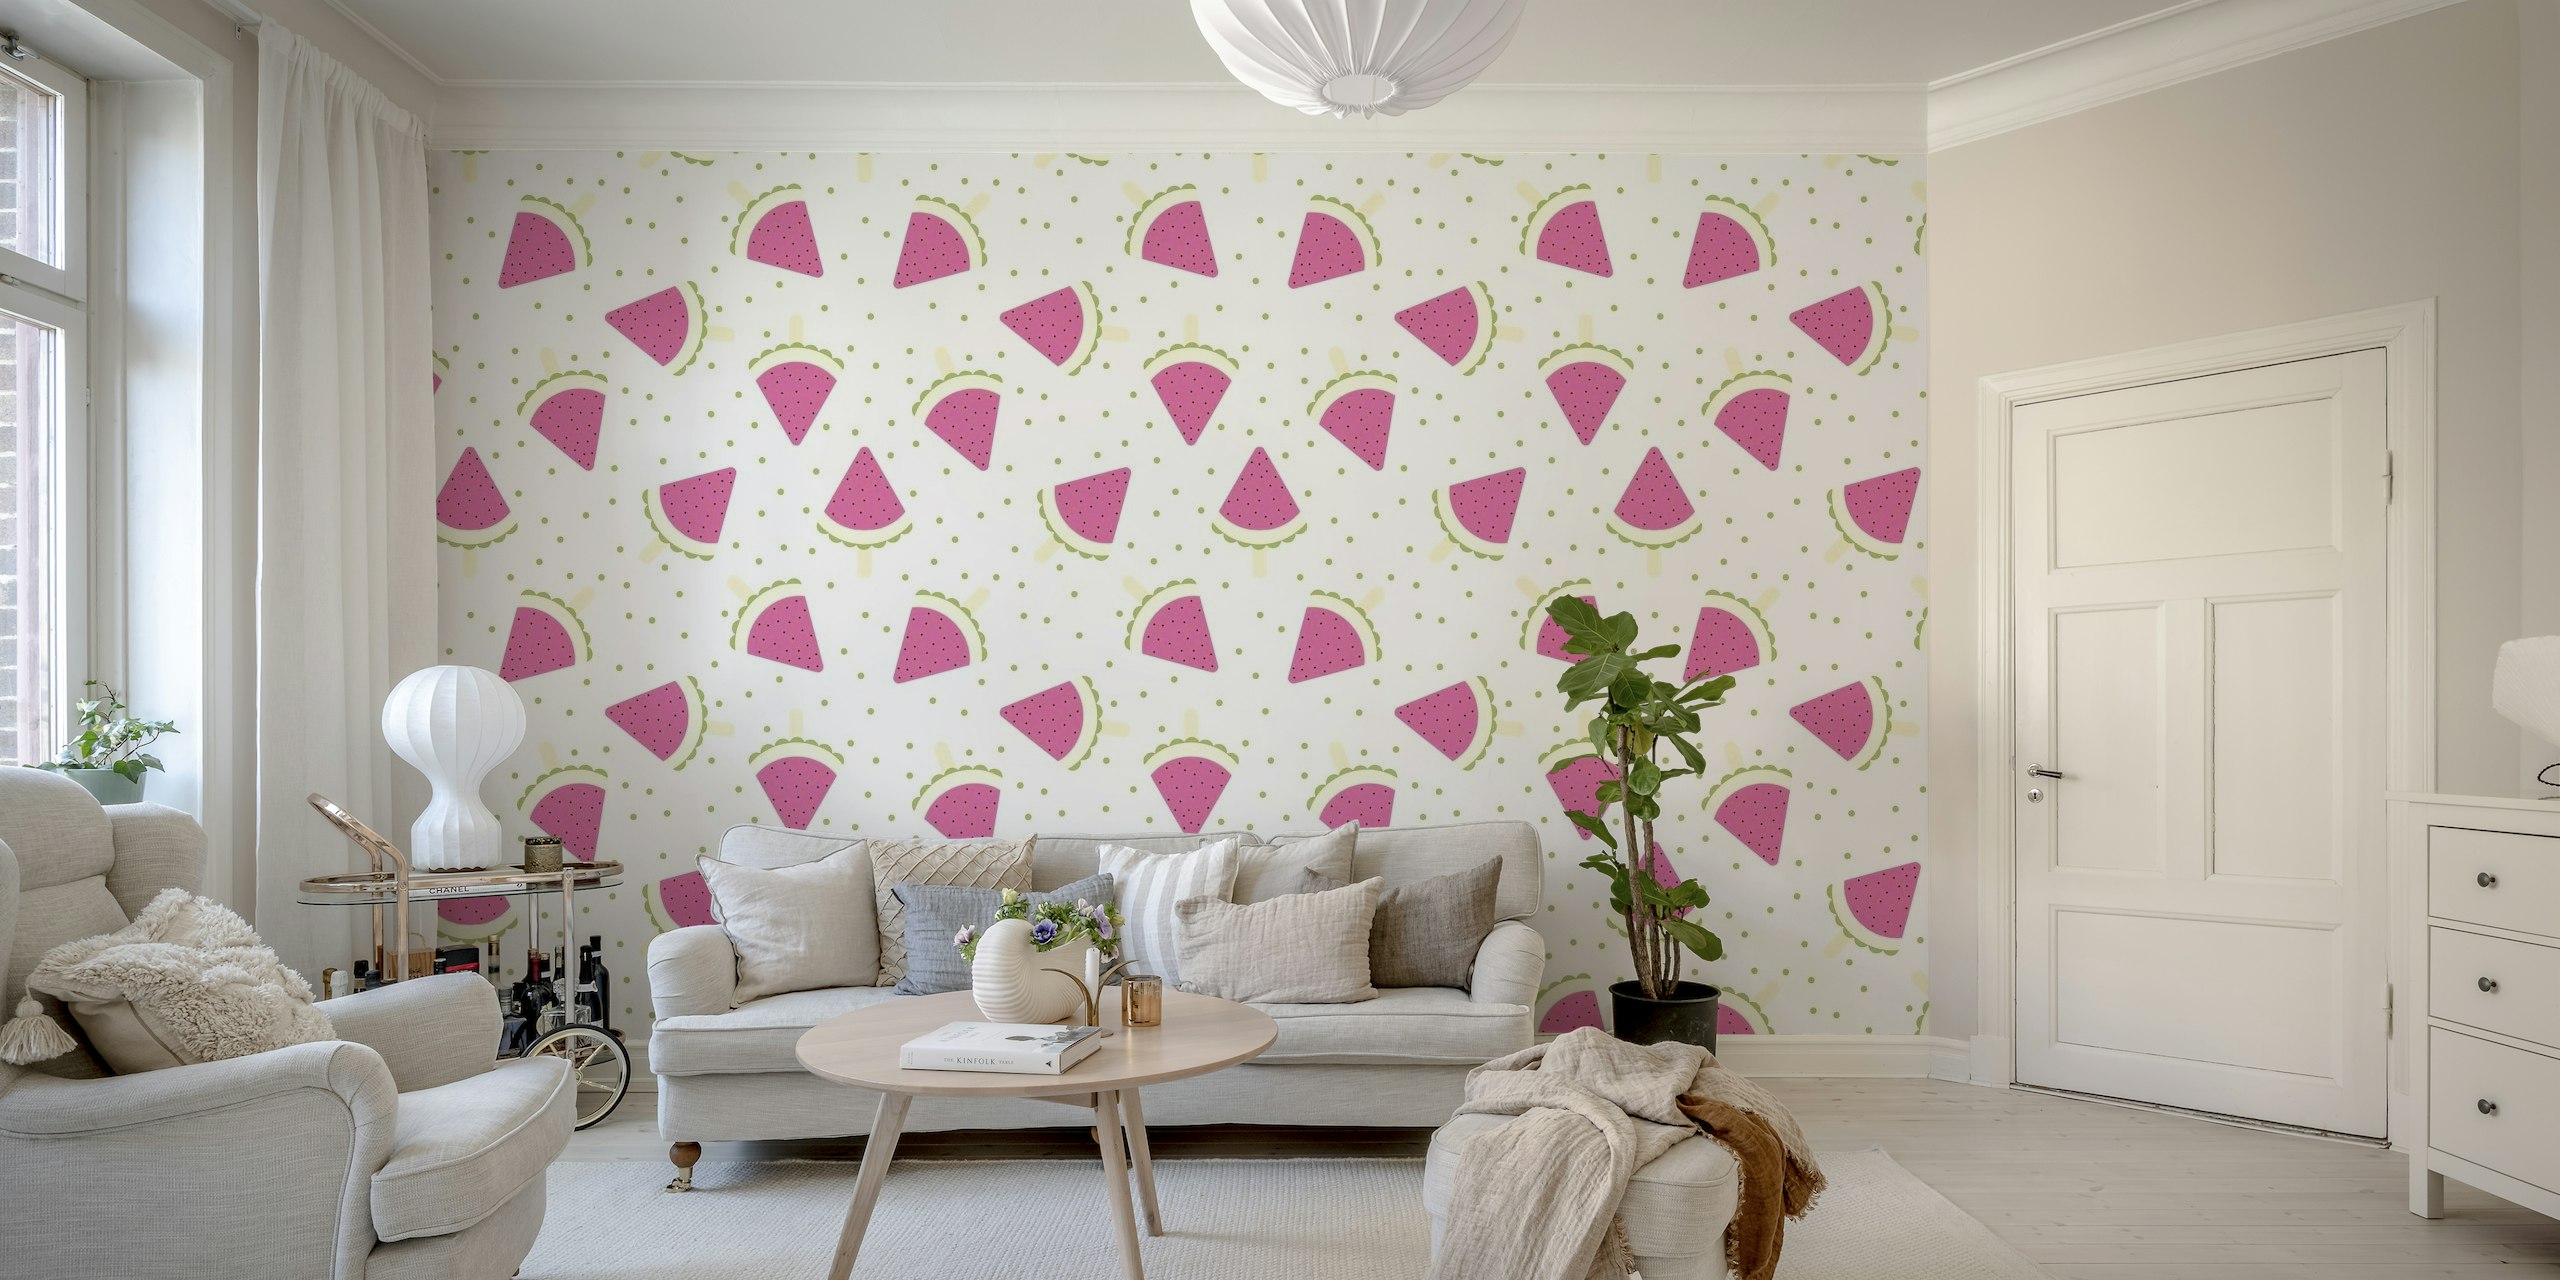 Watermelon Popsicles Fuchsia Dots Green wall mural with playful watermelon slices and dotted pattern.